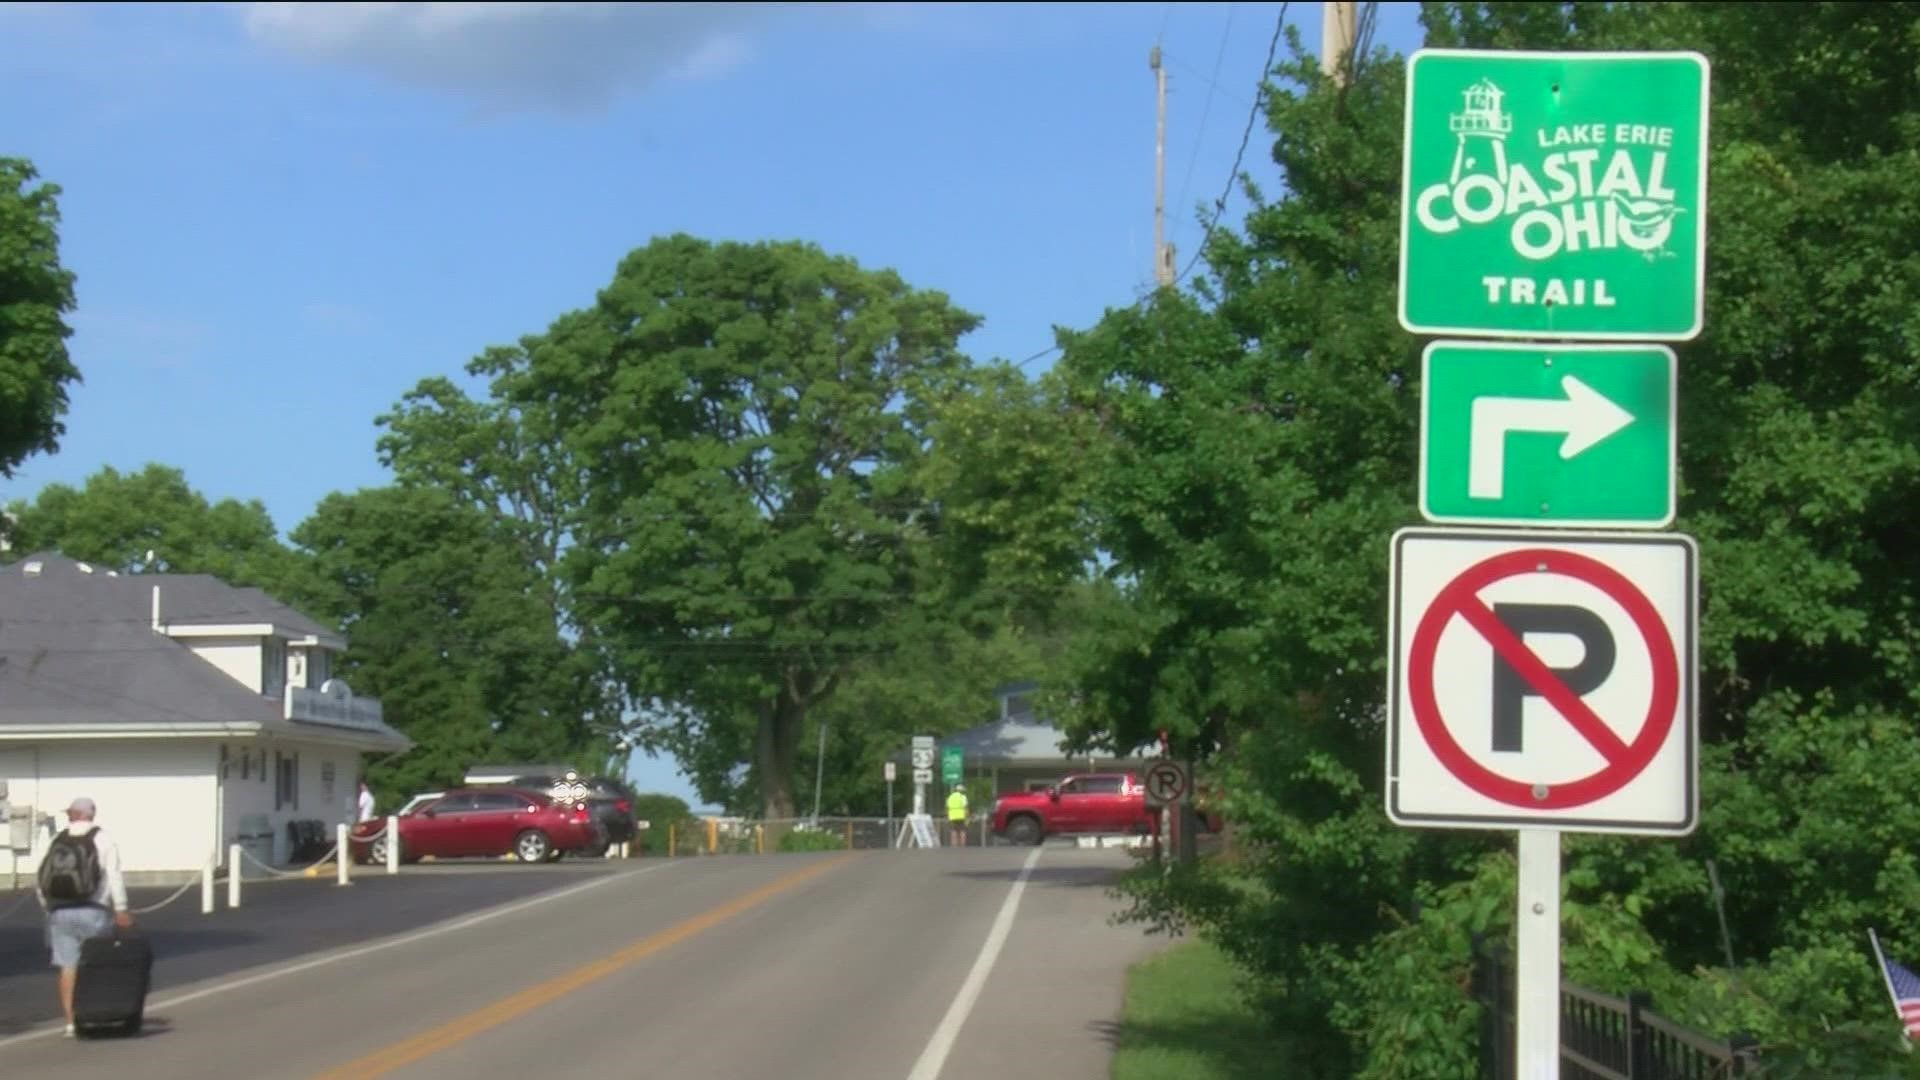 The cost of gas may be rising, but northwest Ohioans are still hitting the road.